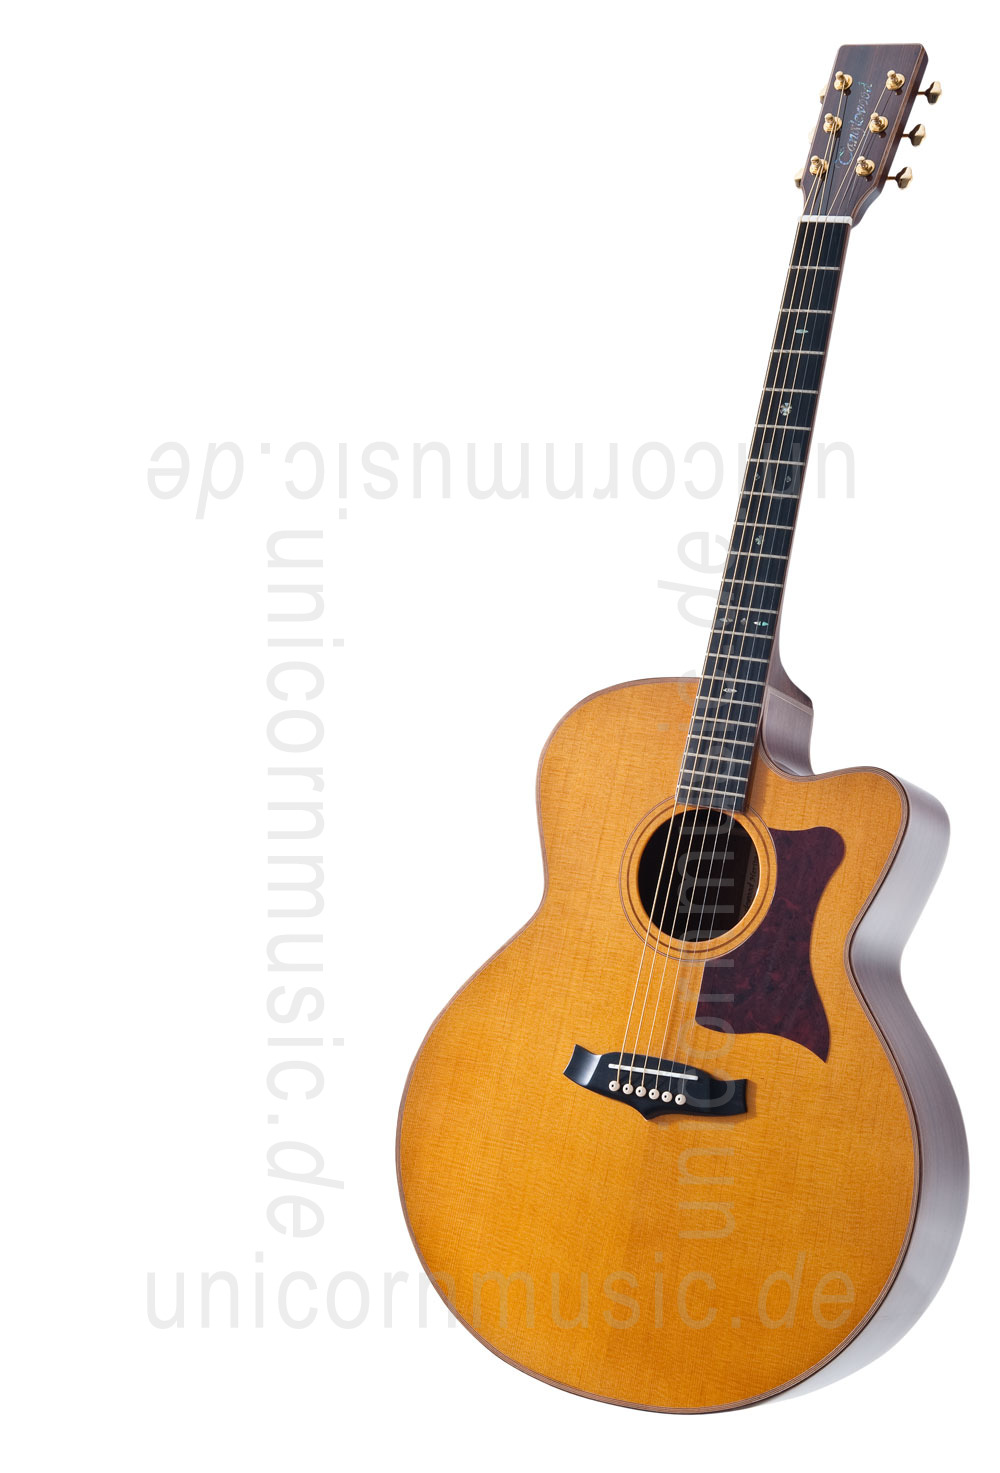 to article description / price Acoustic Guitar TANGLEWOOD TW55/H E - Heritage Series - Fishman Presys Blend - Jumbo - Cutaway - all solid